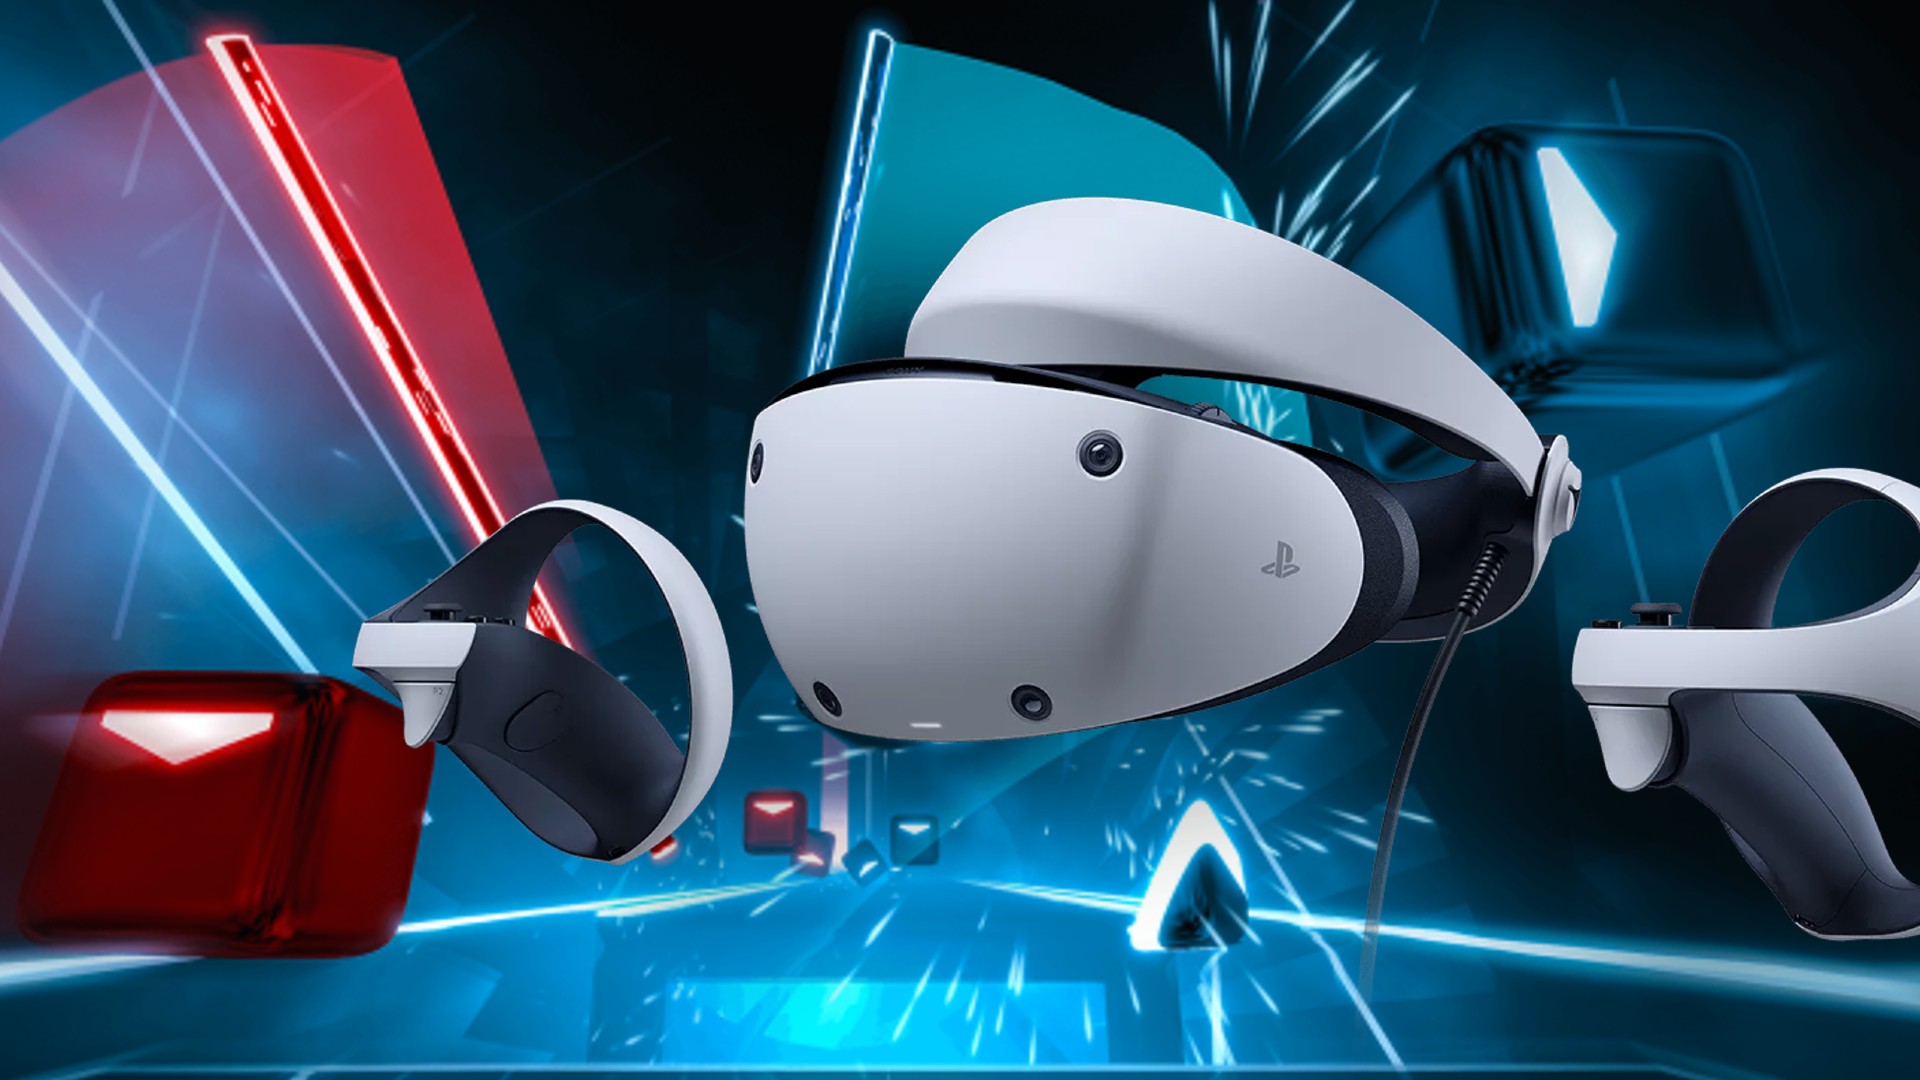 Here are all the new PSVR 2 announcements from the PlayStation